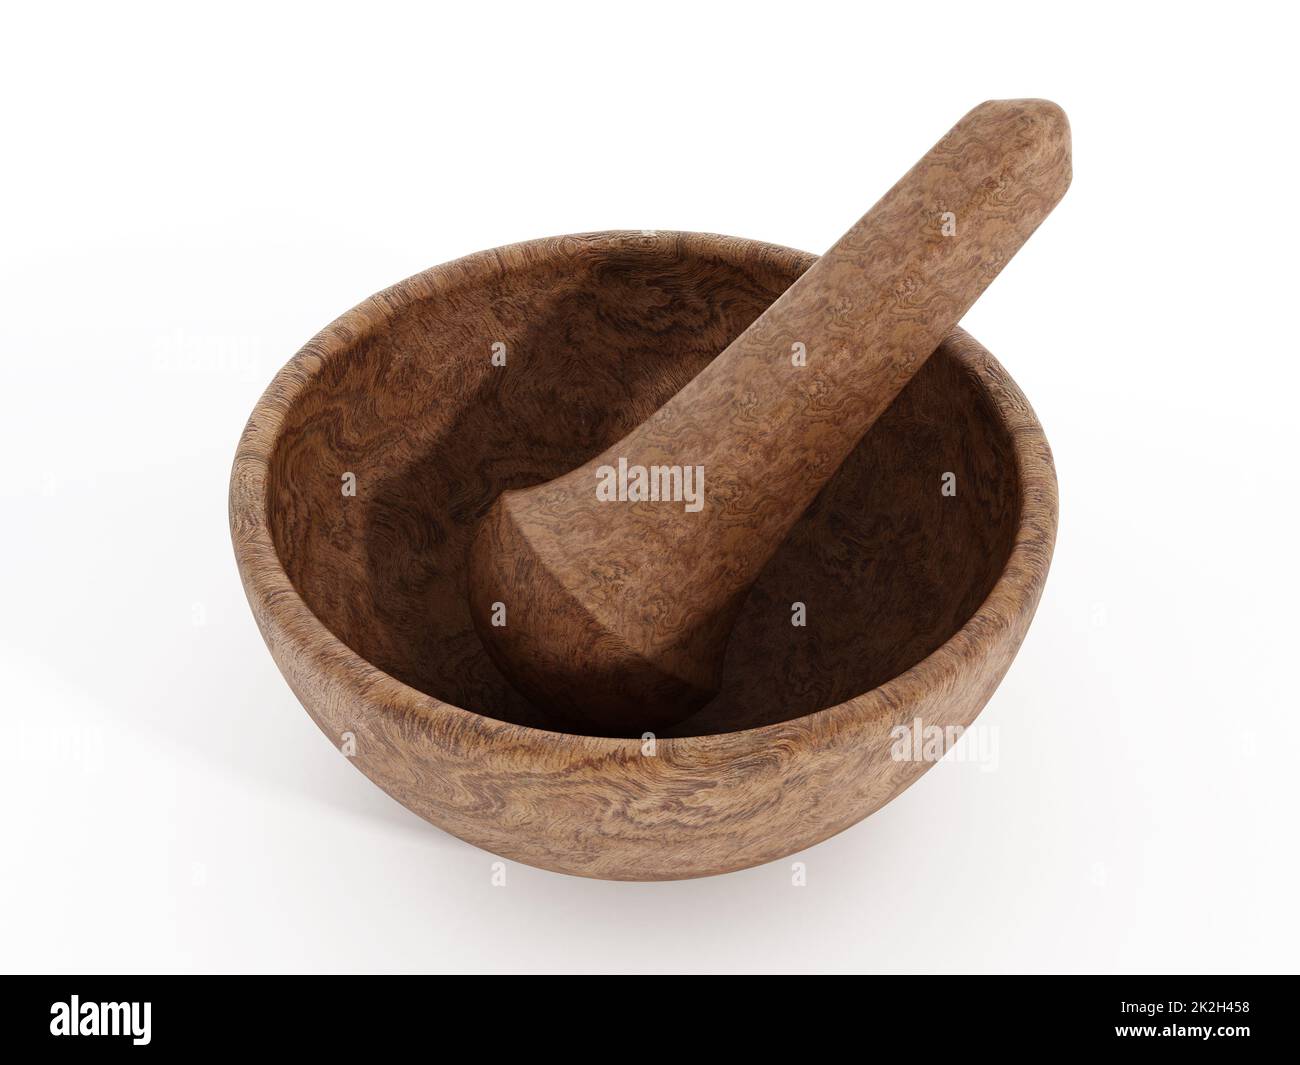 Wooden pestle and mortar Stock Photo